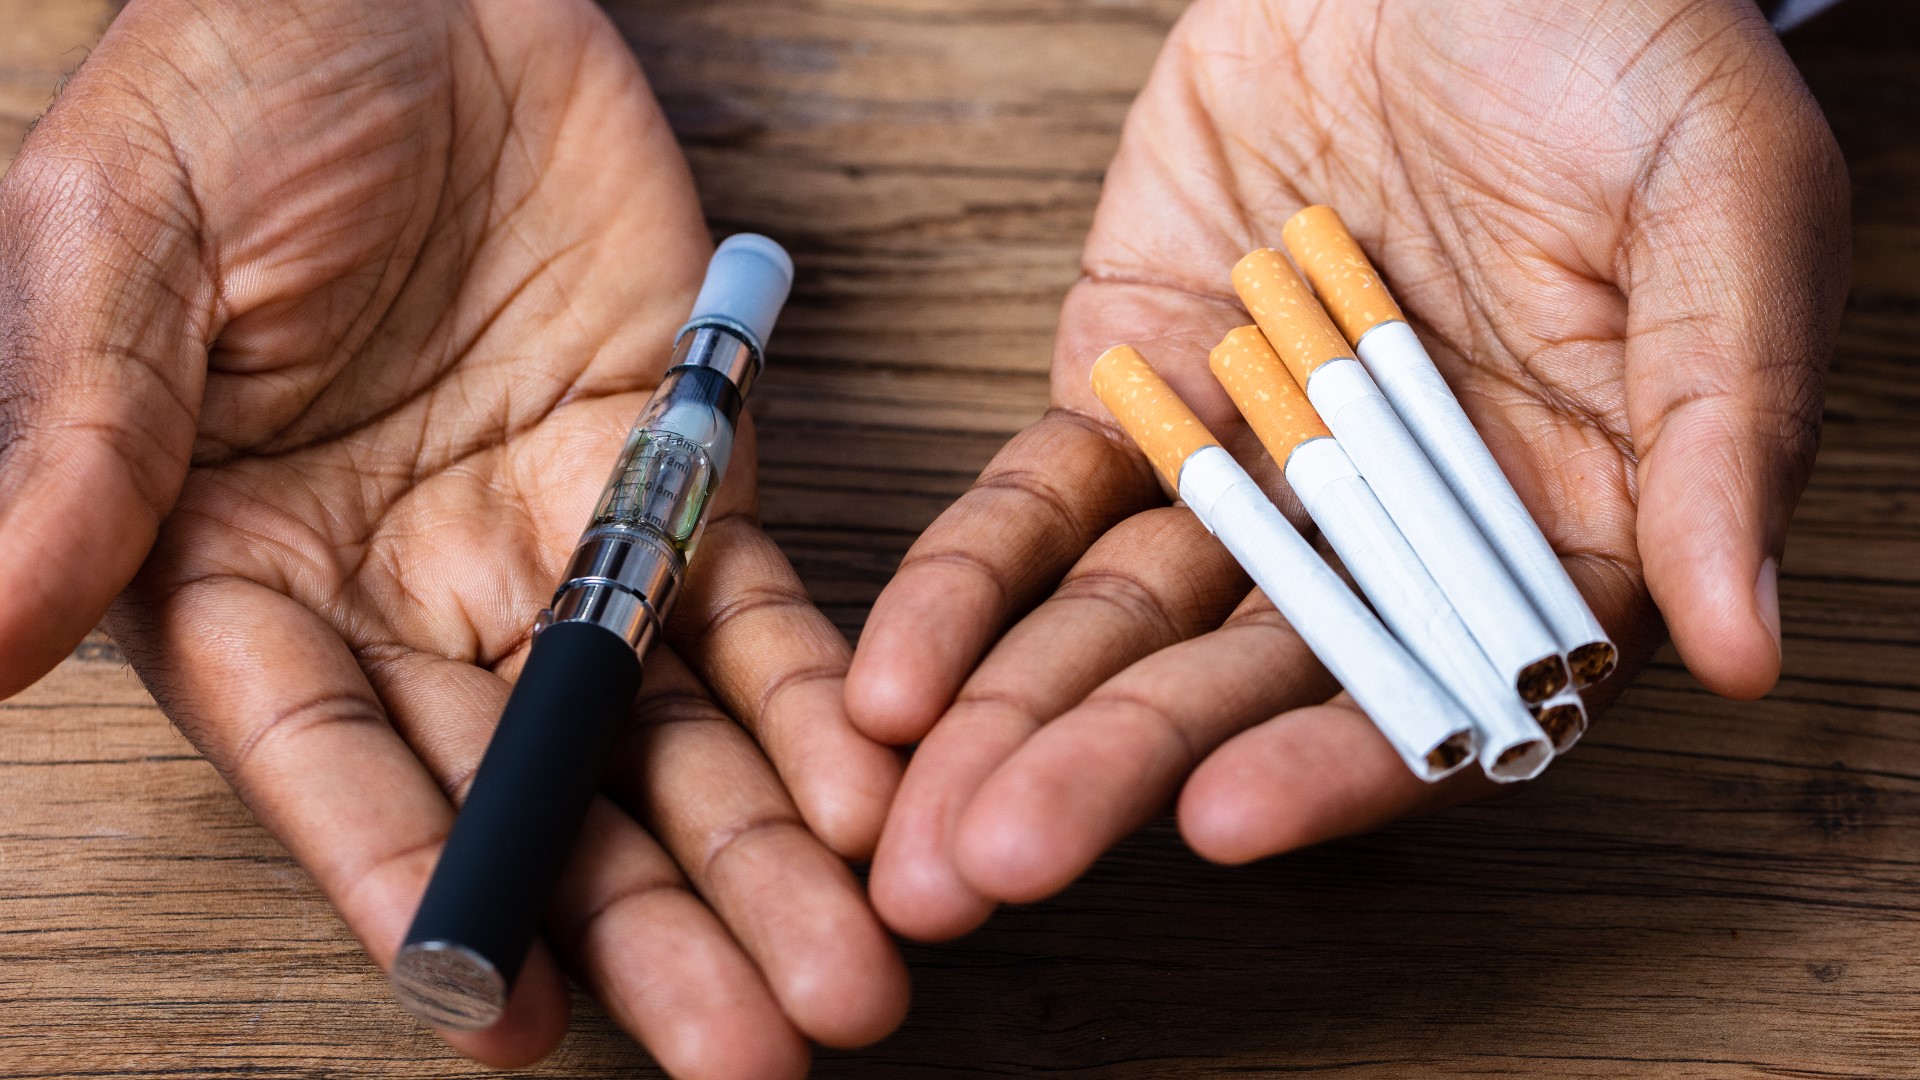 The UC Davis Comprehensive Cancer Center has launched the state's first-ever tobacco cessation policy research center.